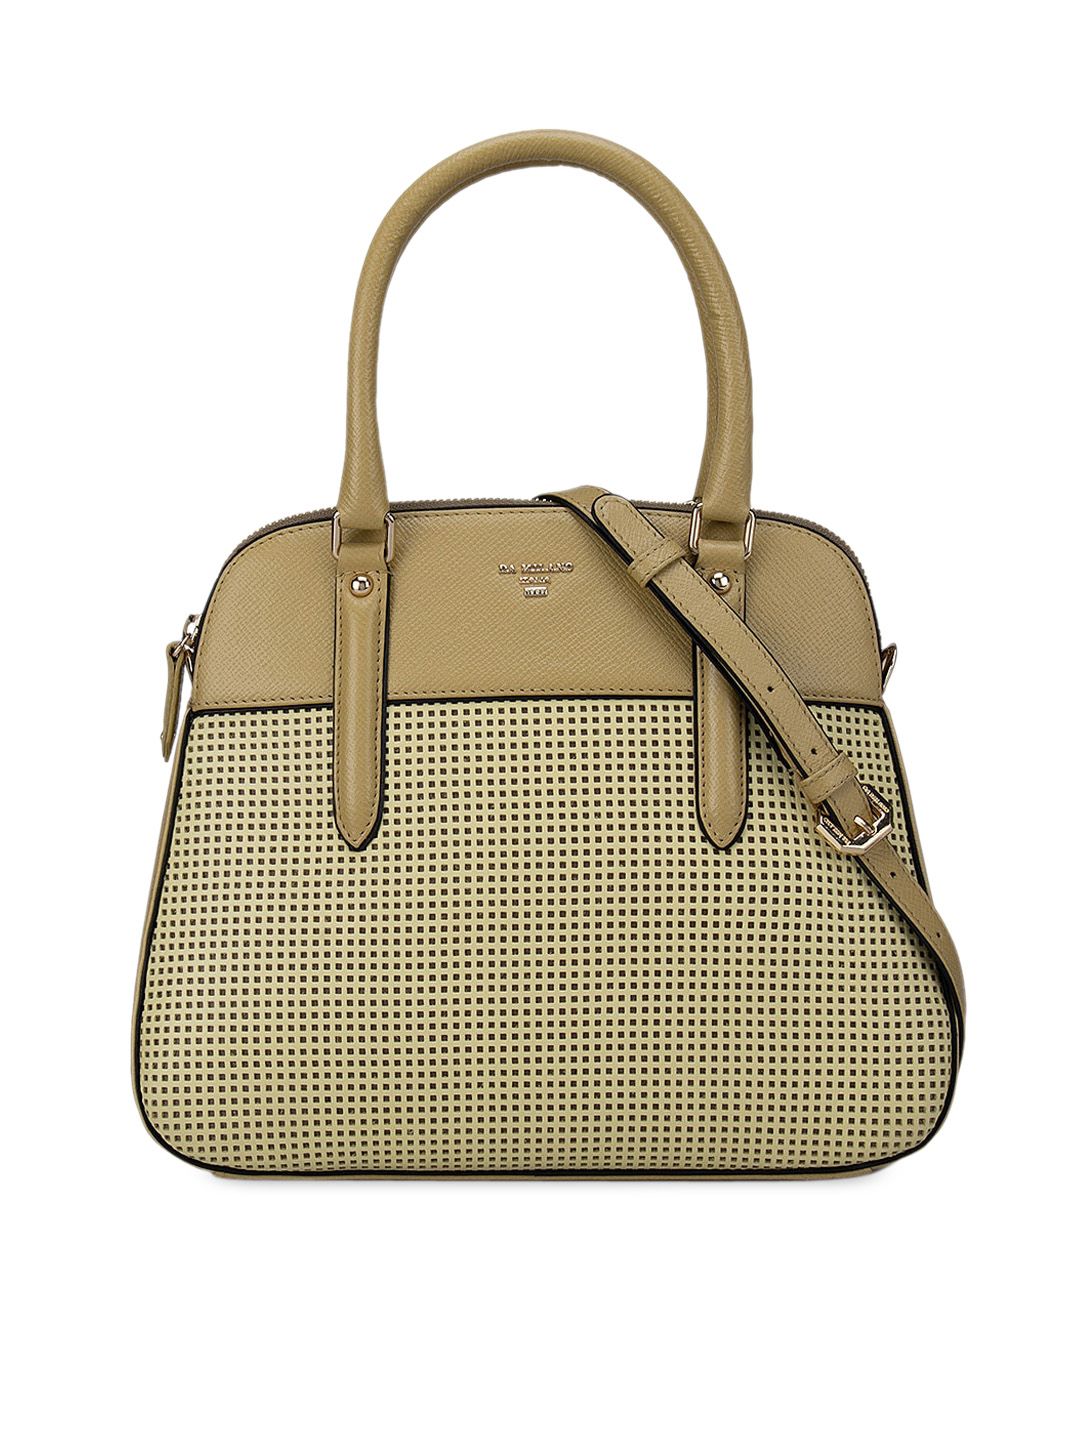 Da Milano Green Checked Leather Structured Handheld Bag Price in India